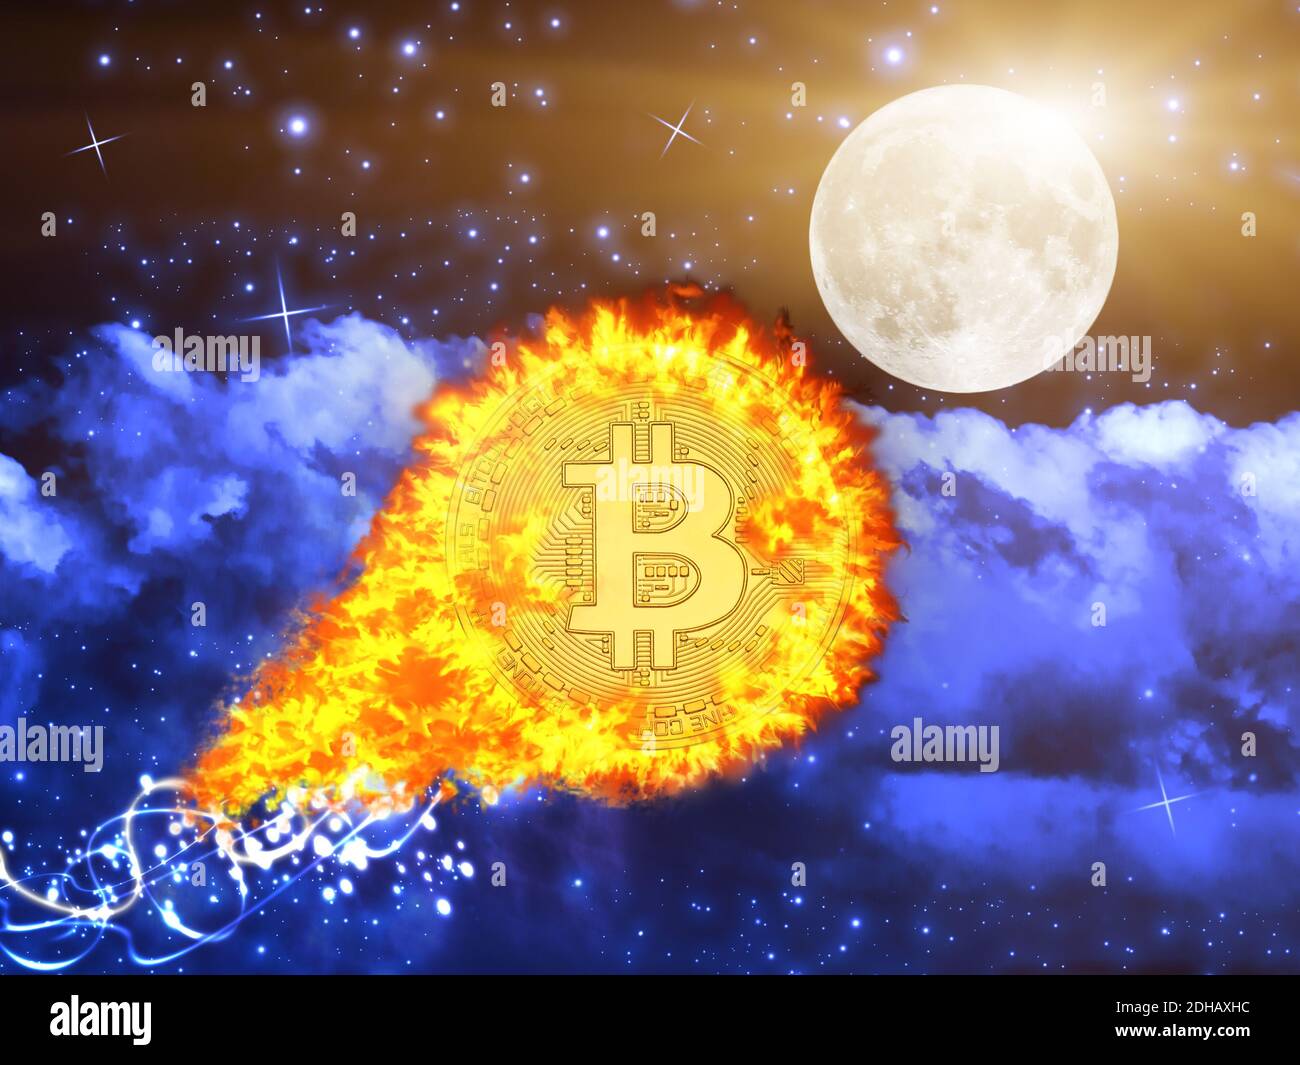 concept of Bitcoin value going to the moon. Fire Bitcoin hits an all-time high price record in November 2020. Cryptocurrency coin in the space Stock Photo